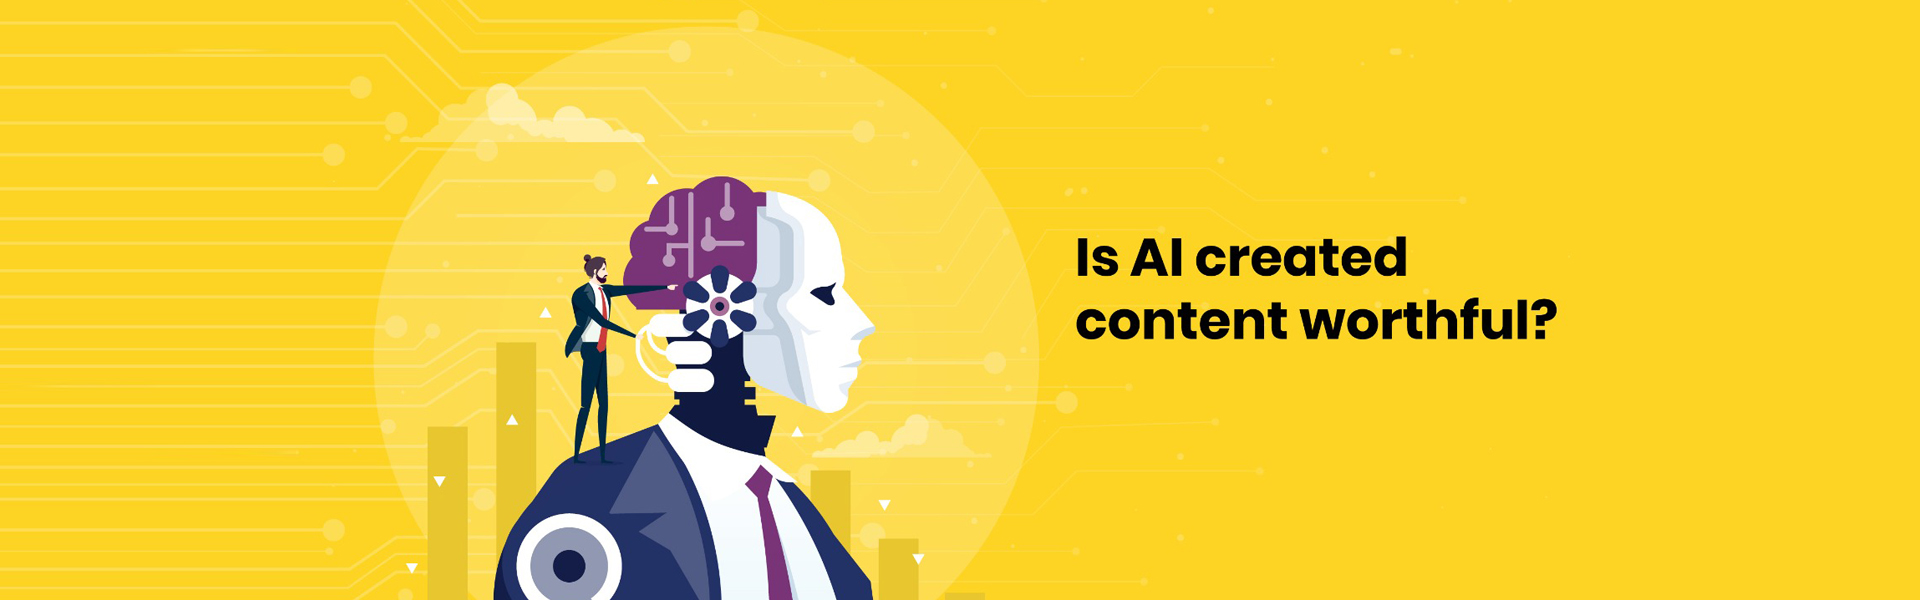 Is AI created content worthful?